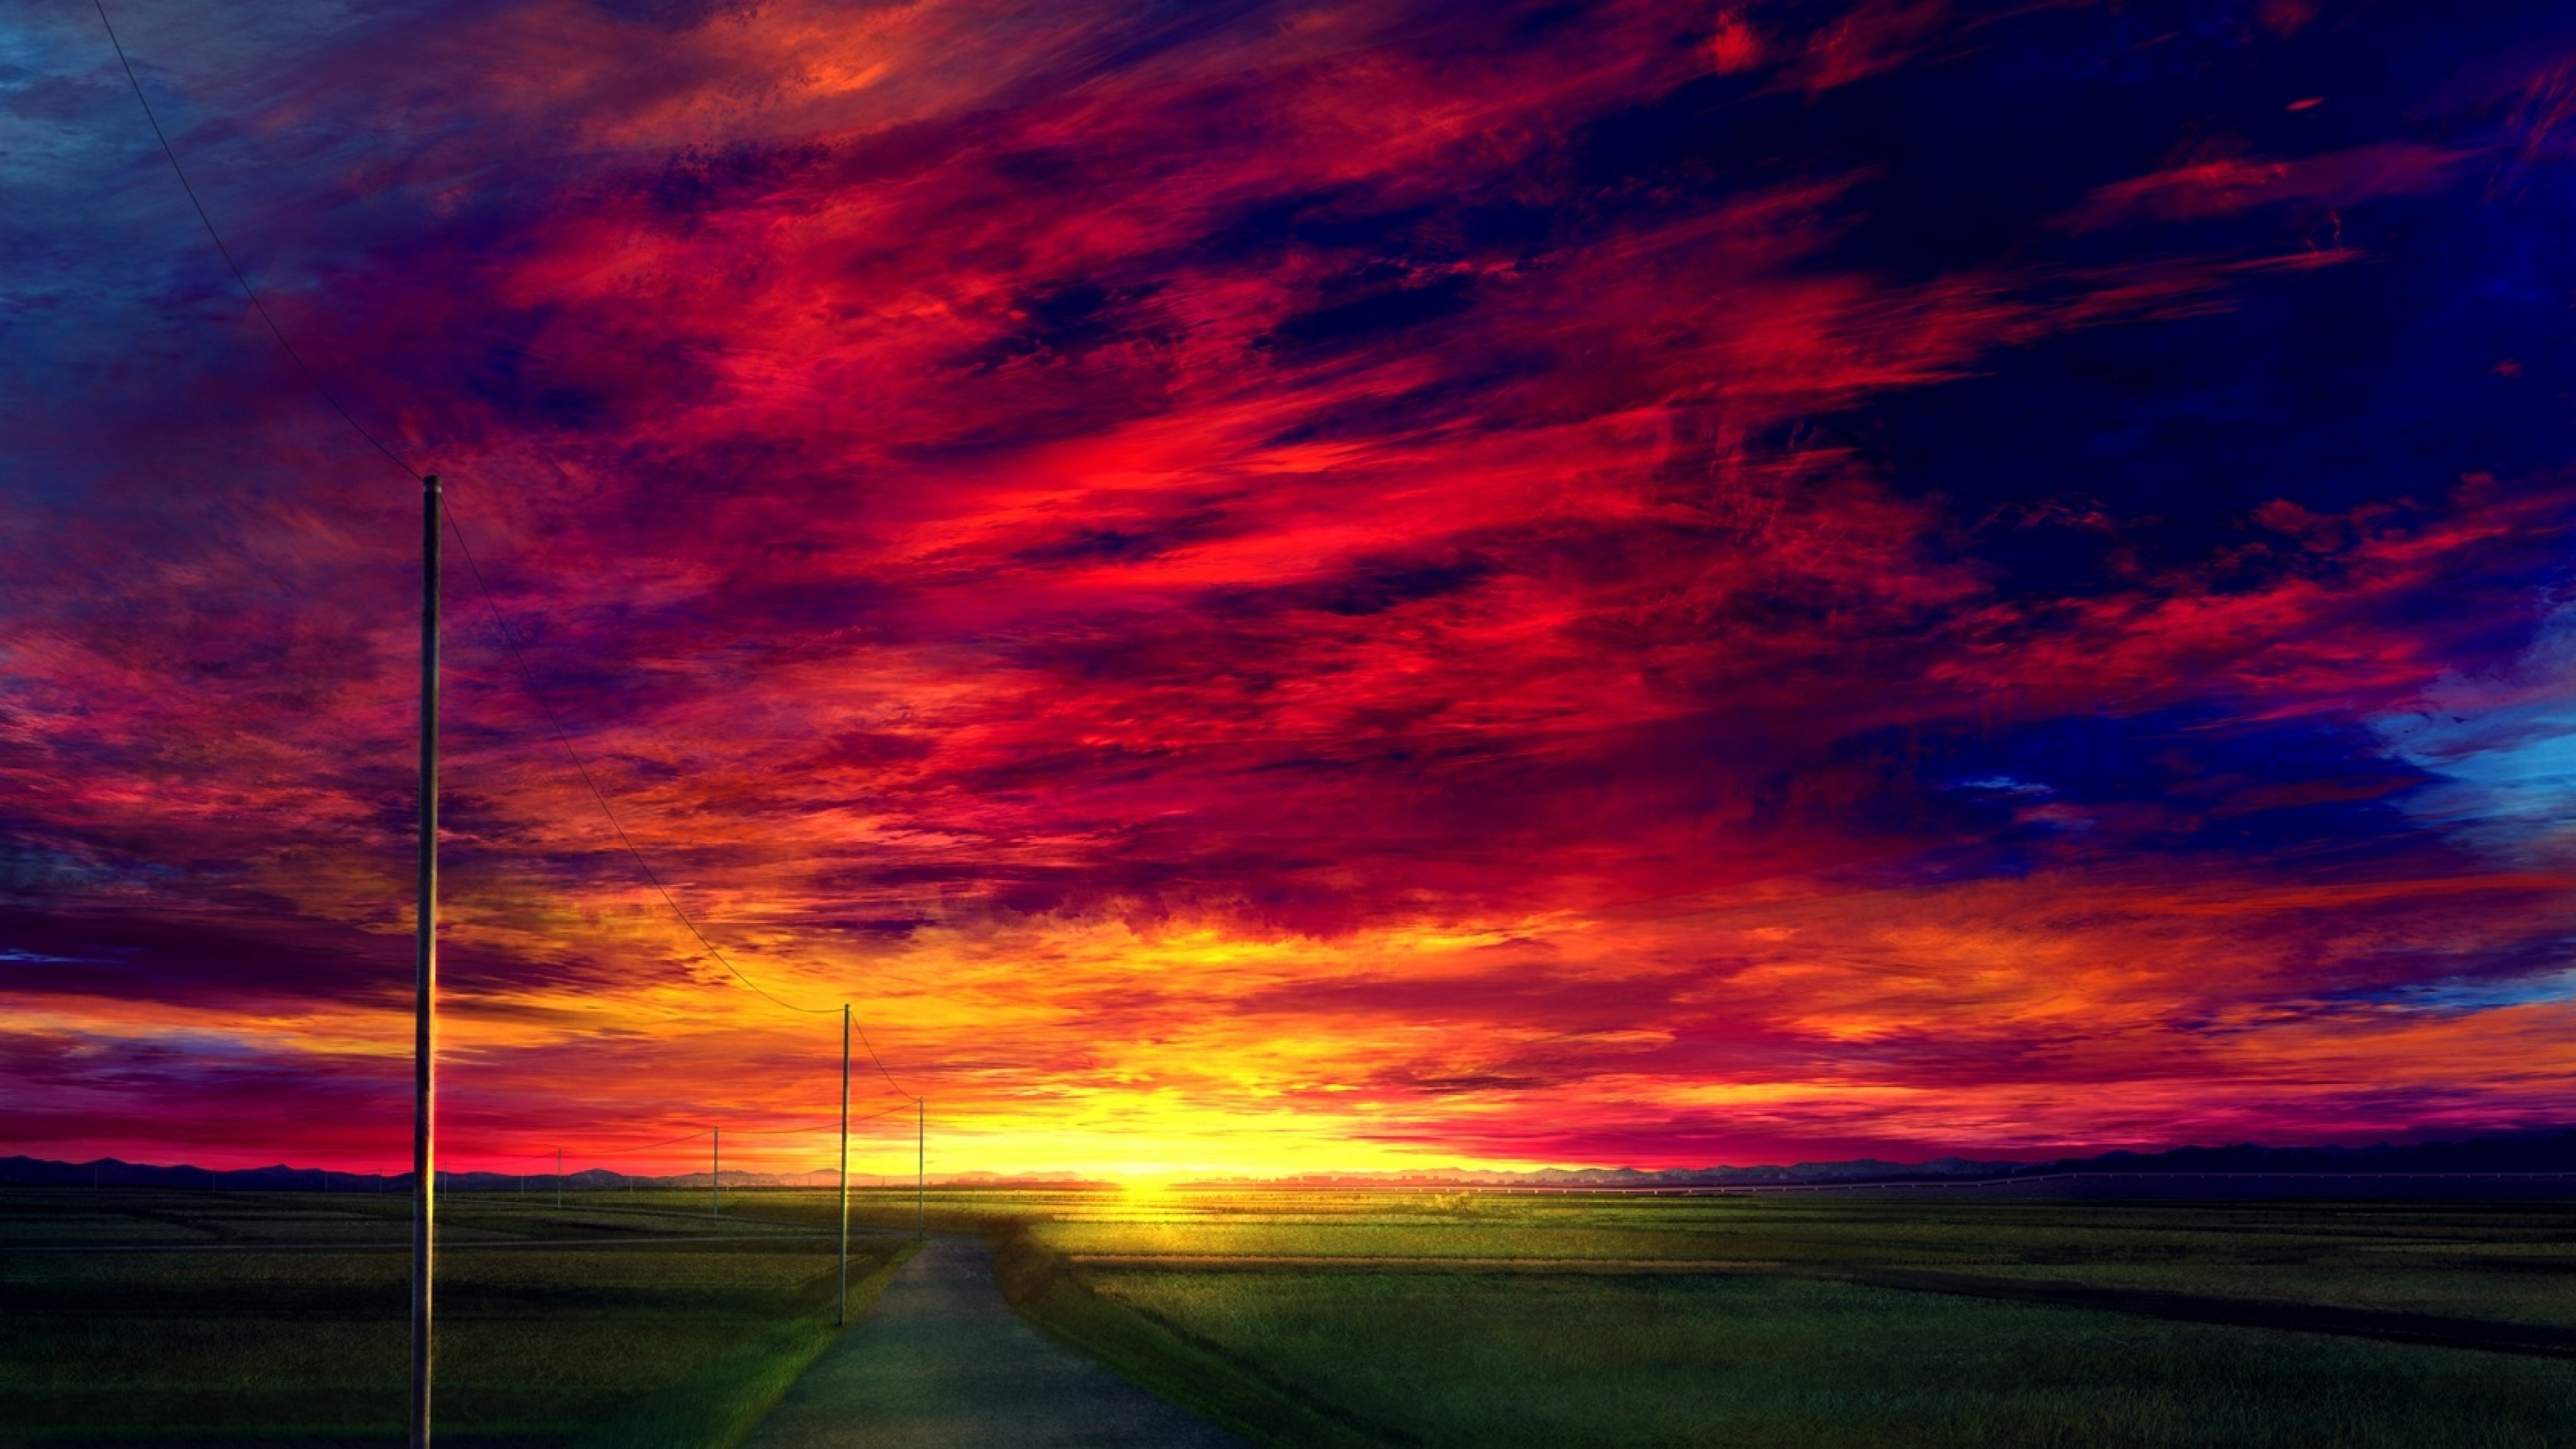 Download 3840x2160 Anime Landscape, Sunset, Red Sky, Realistic, Field, Scenic Wallpaper for UHD TV